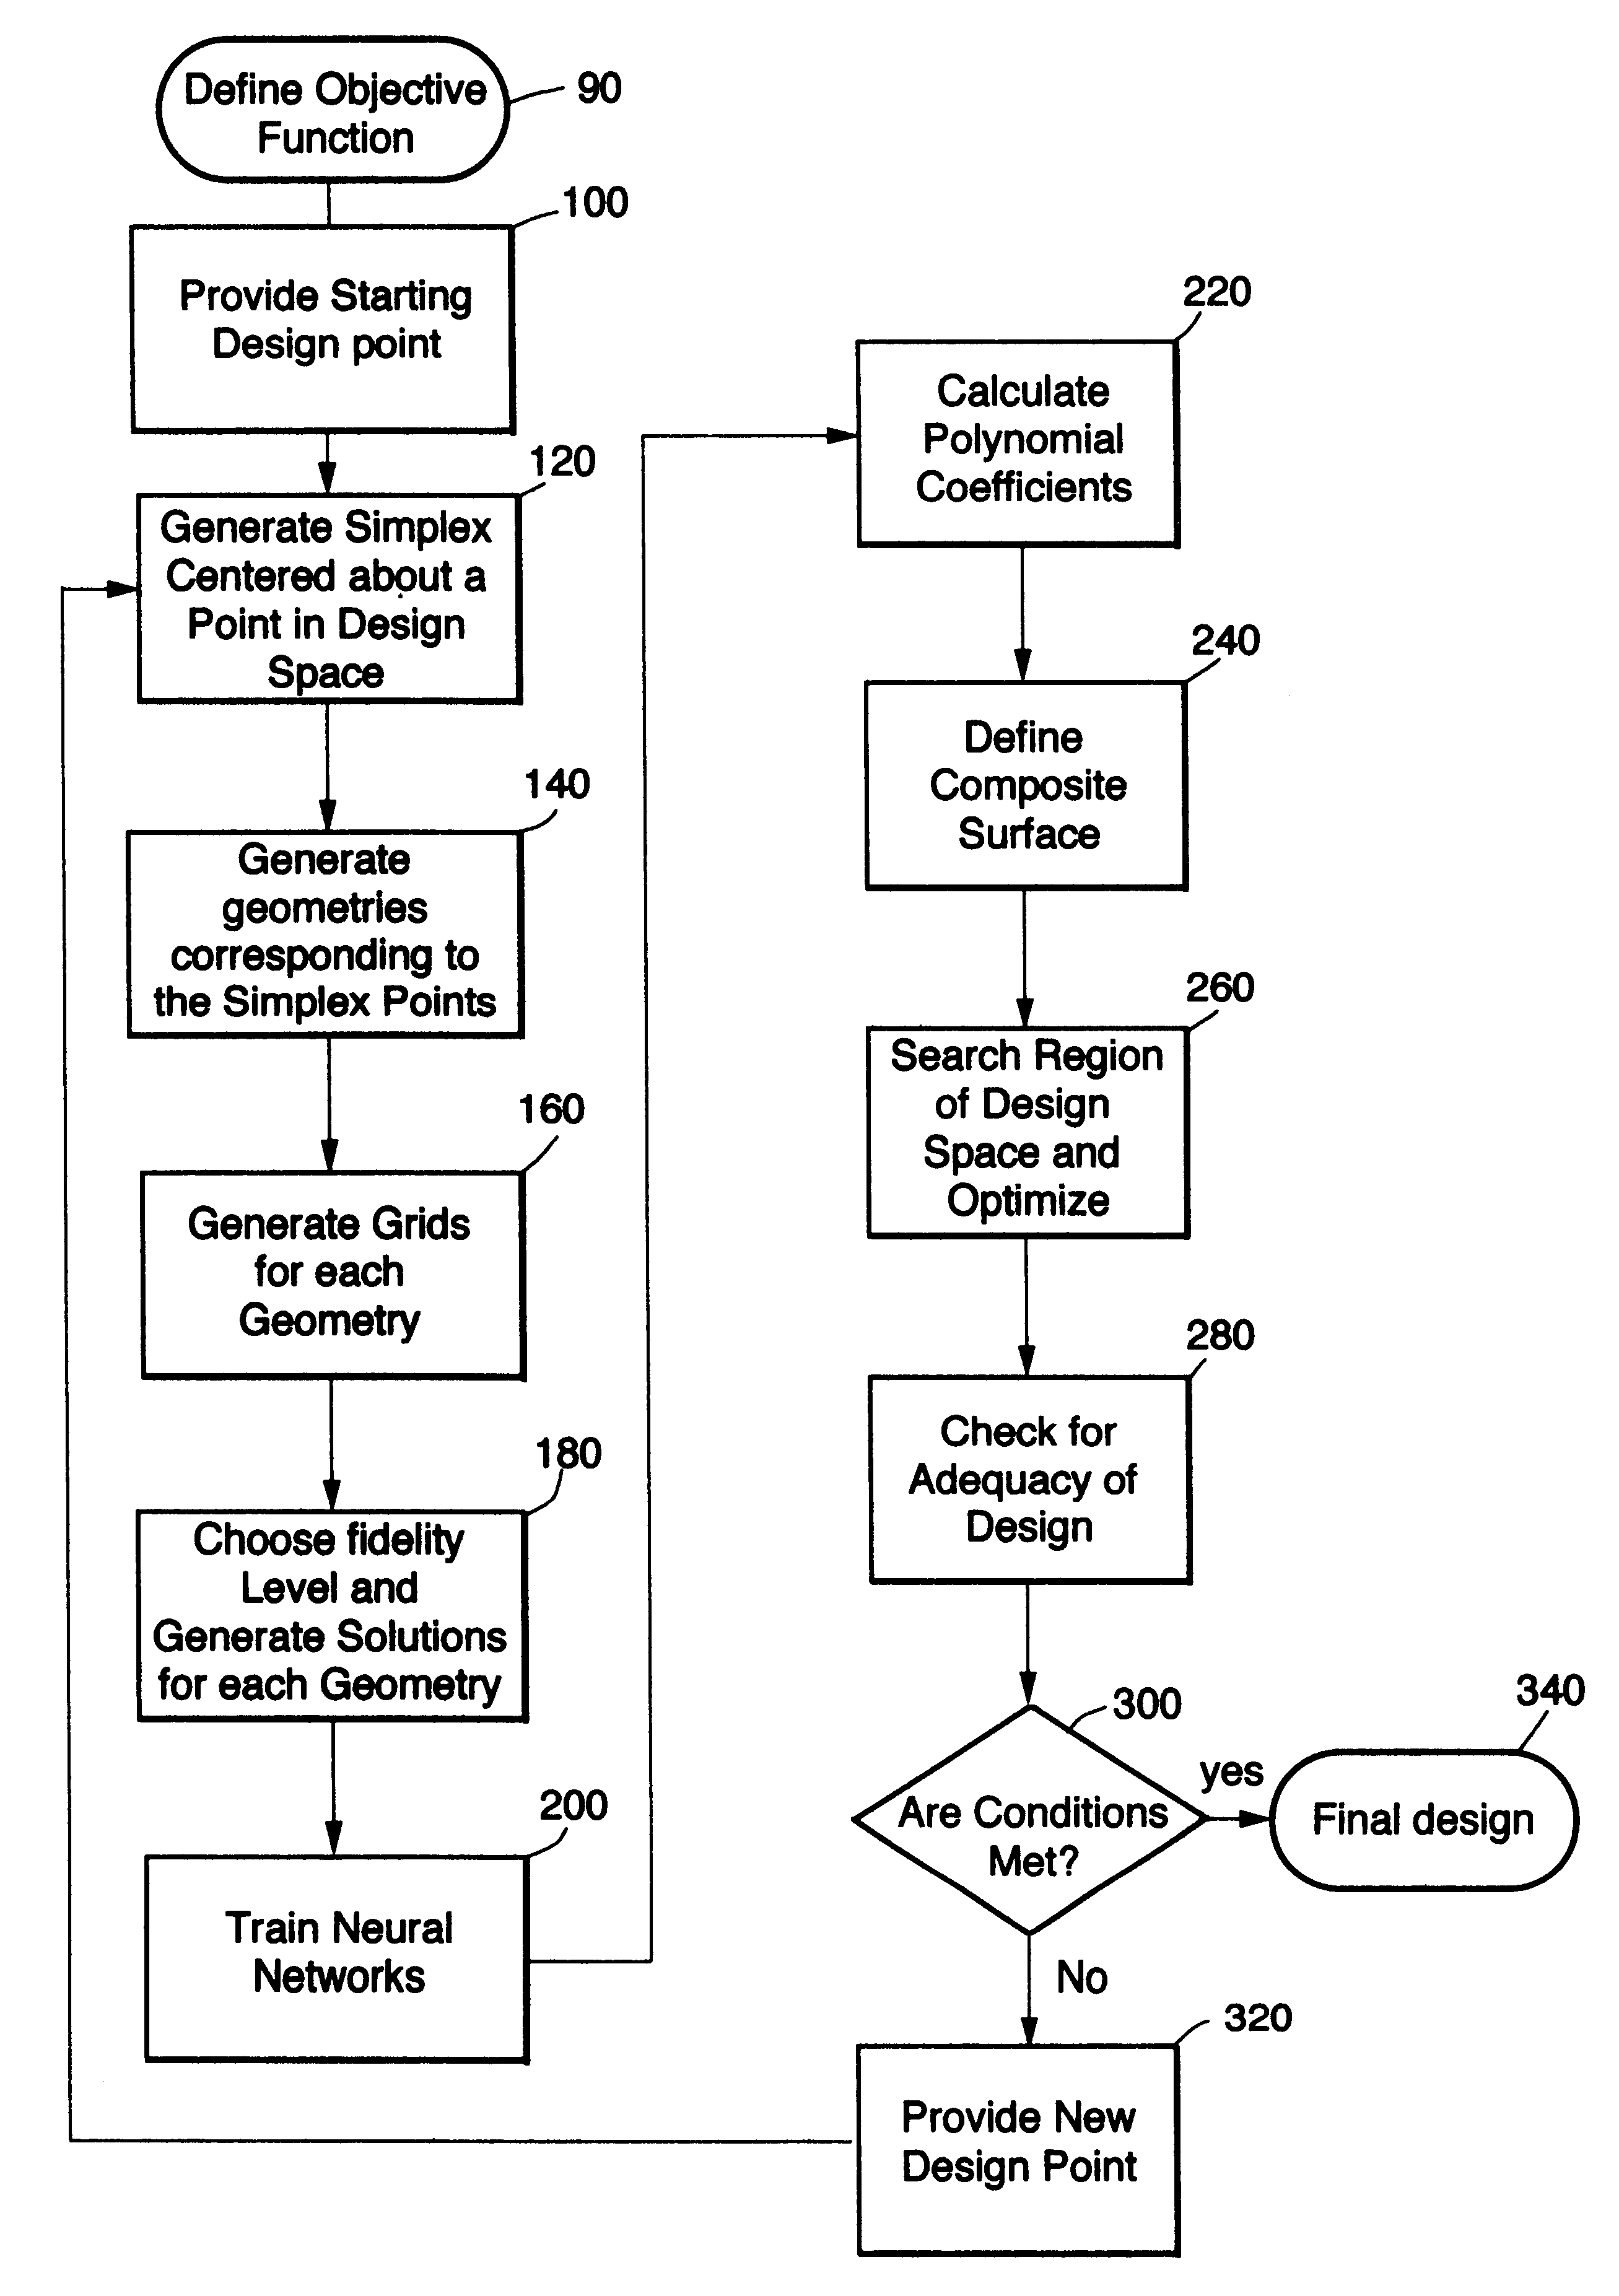 Method for constructing composite response surfaces by combining neural networks with other interpolation or estimation techniques